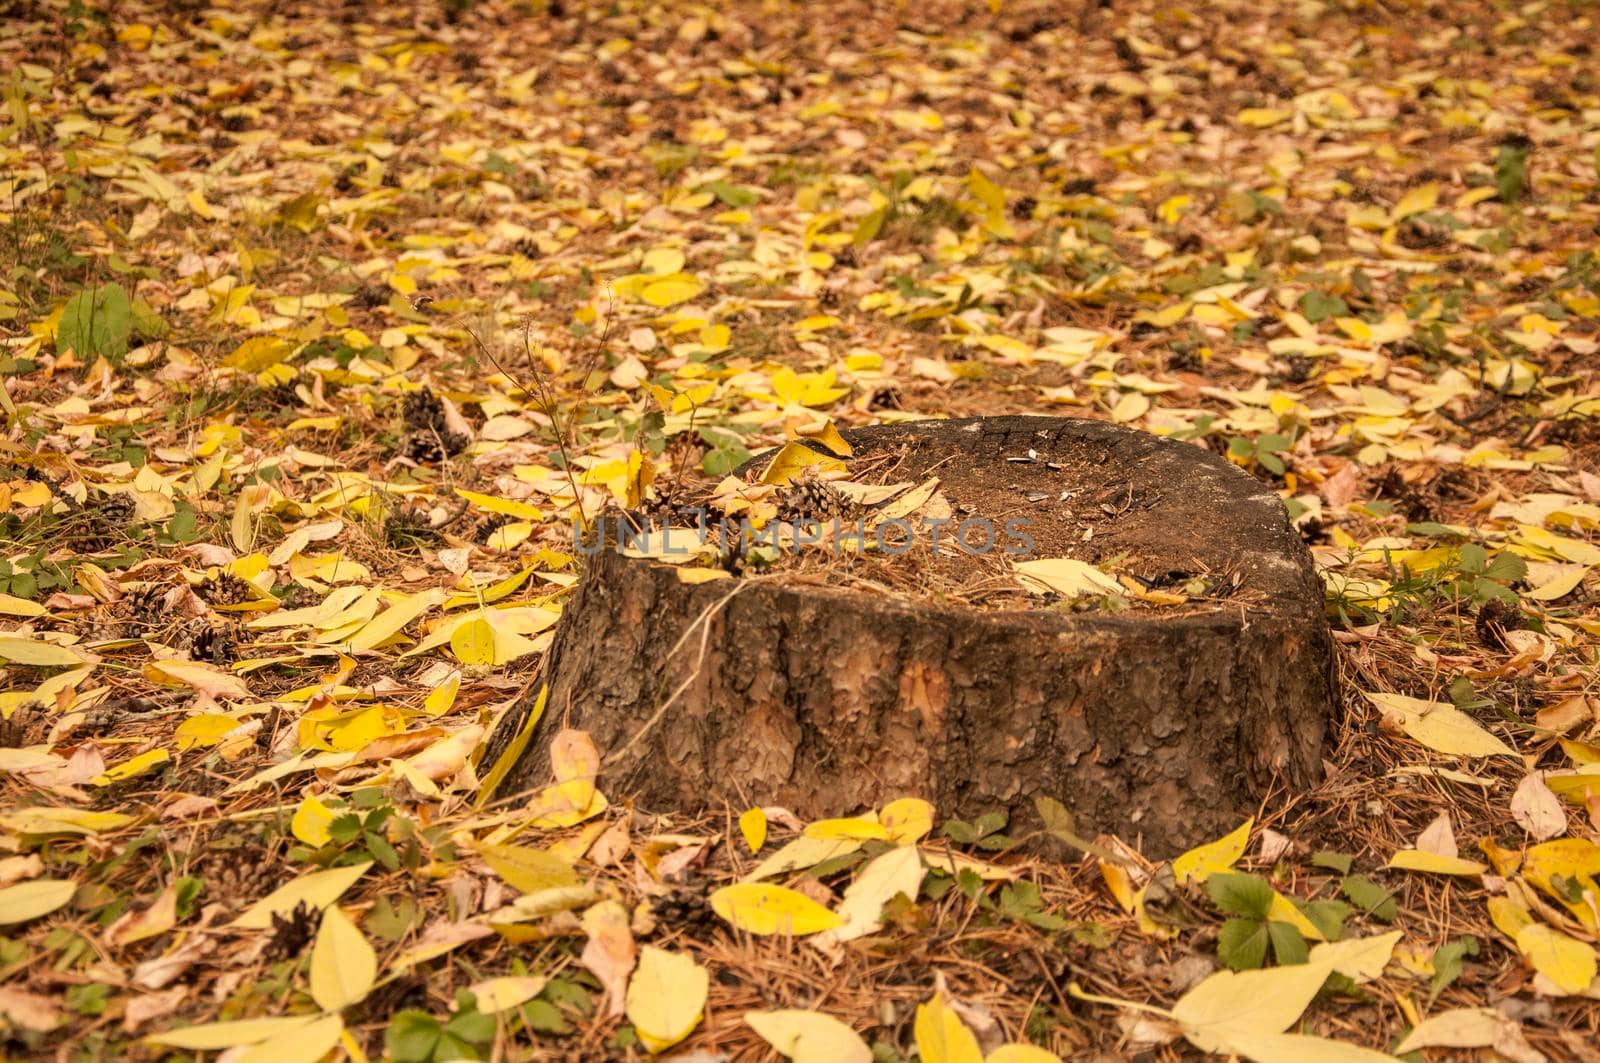 Old scenic stump among fallen autumn leaves by inxti